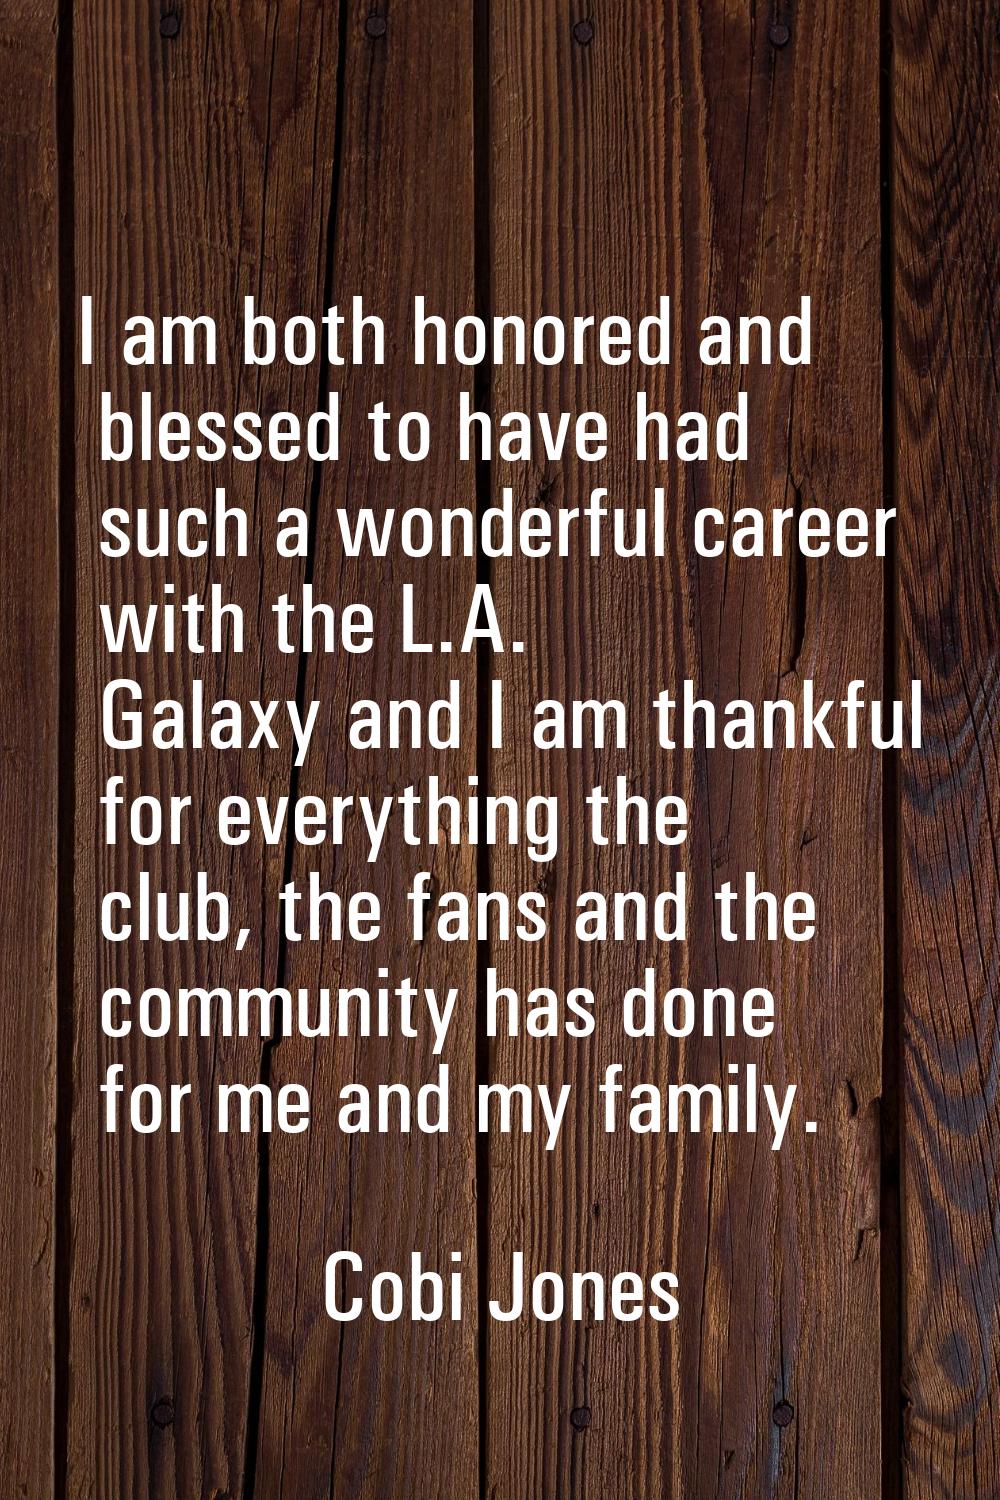 I am both honored and blessed to have had such a wonderful career with the L.A. Galaxy and I am tha